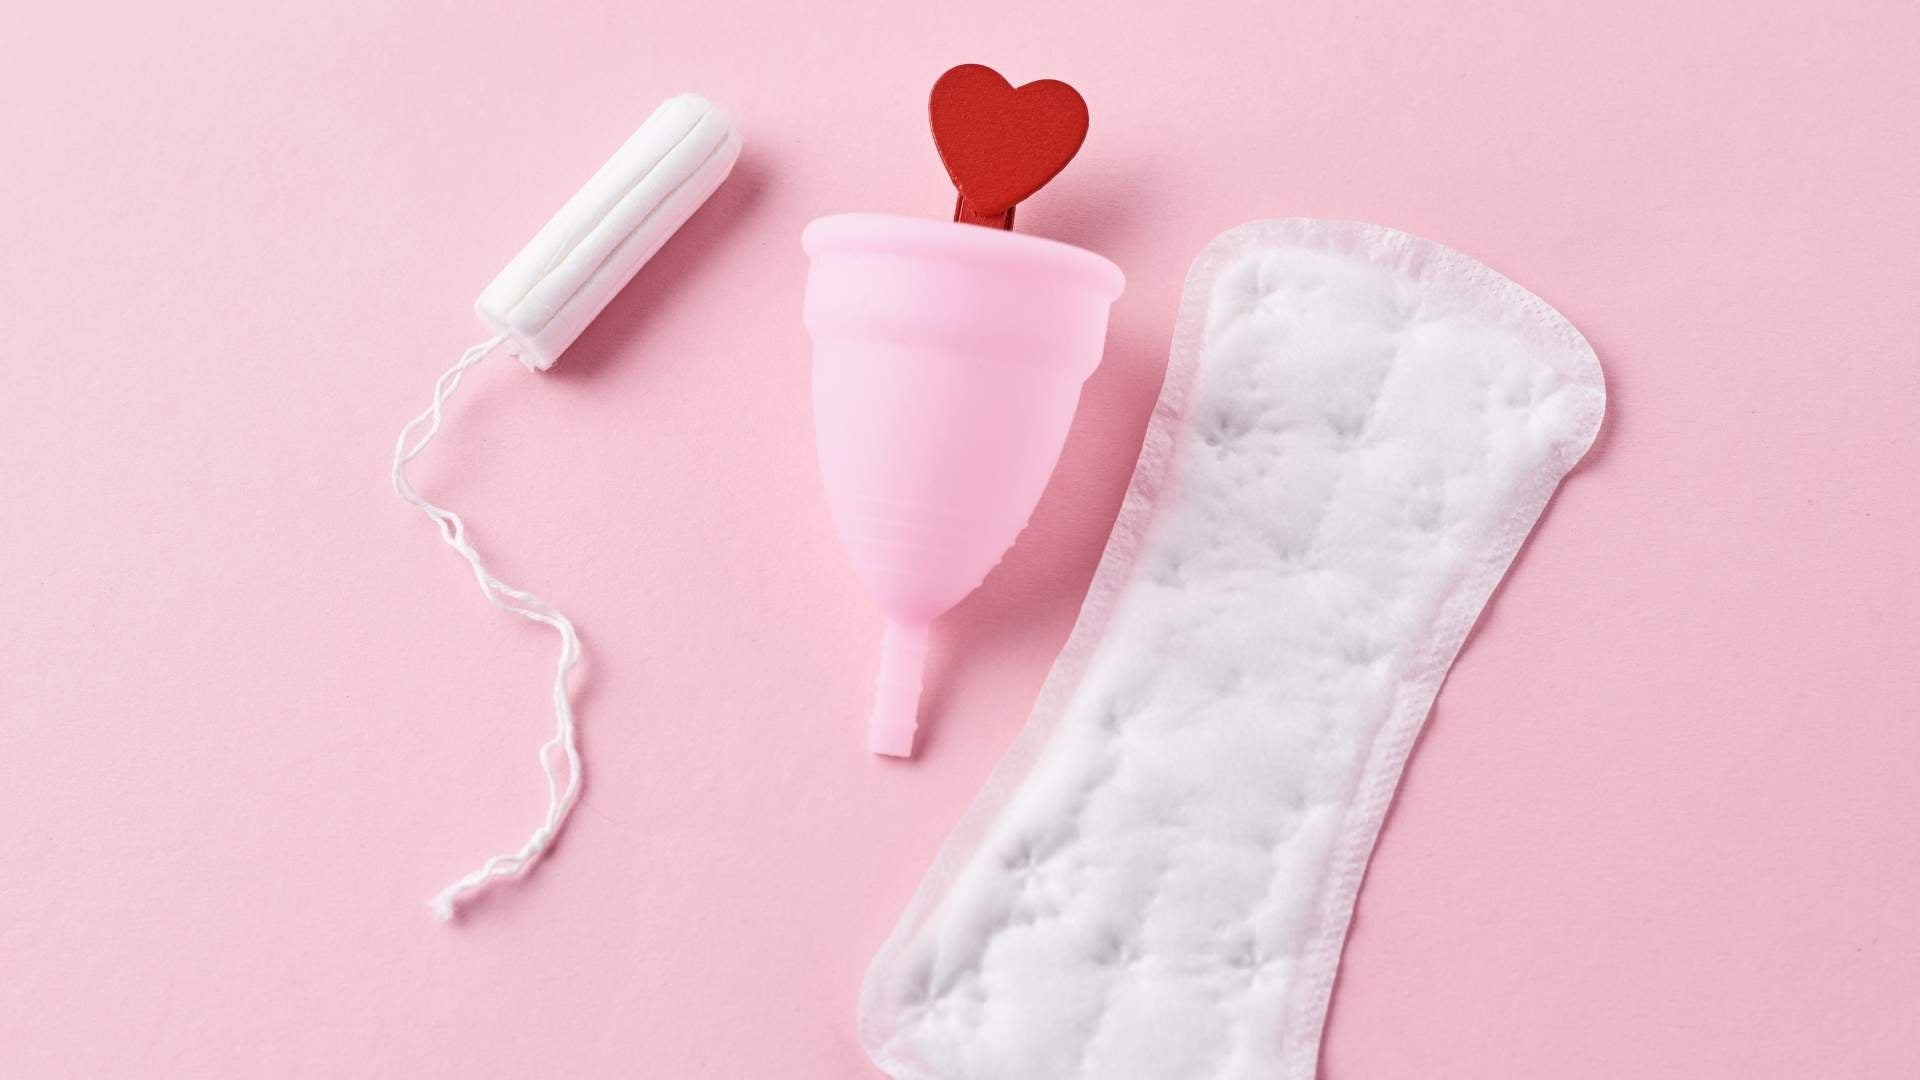 How to Be Hygienic During Periods: Tips for Staying Fresh and Clean When It’s “That Time of the Month”